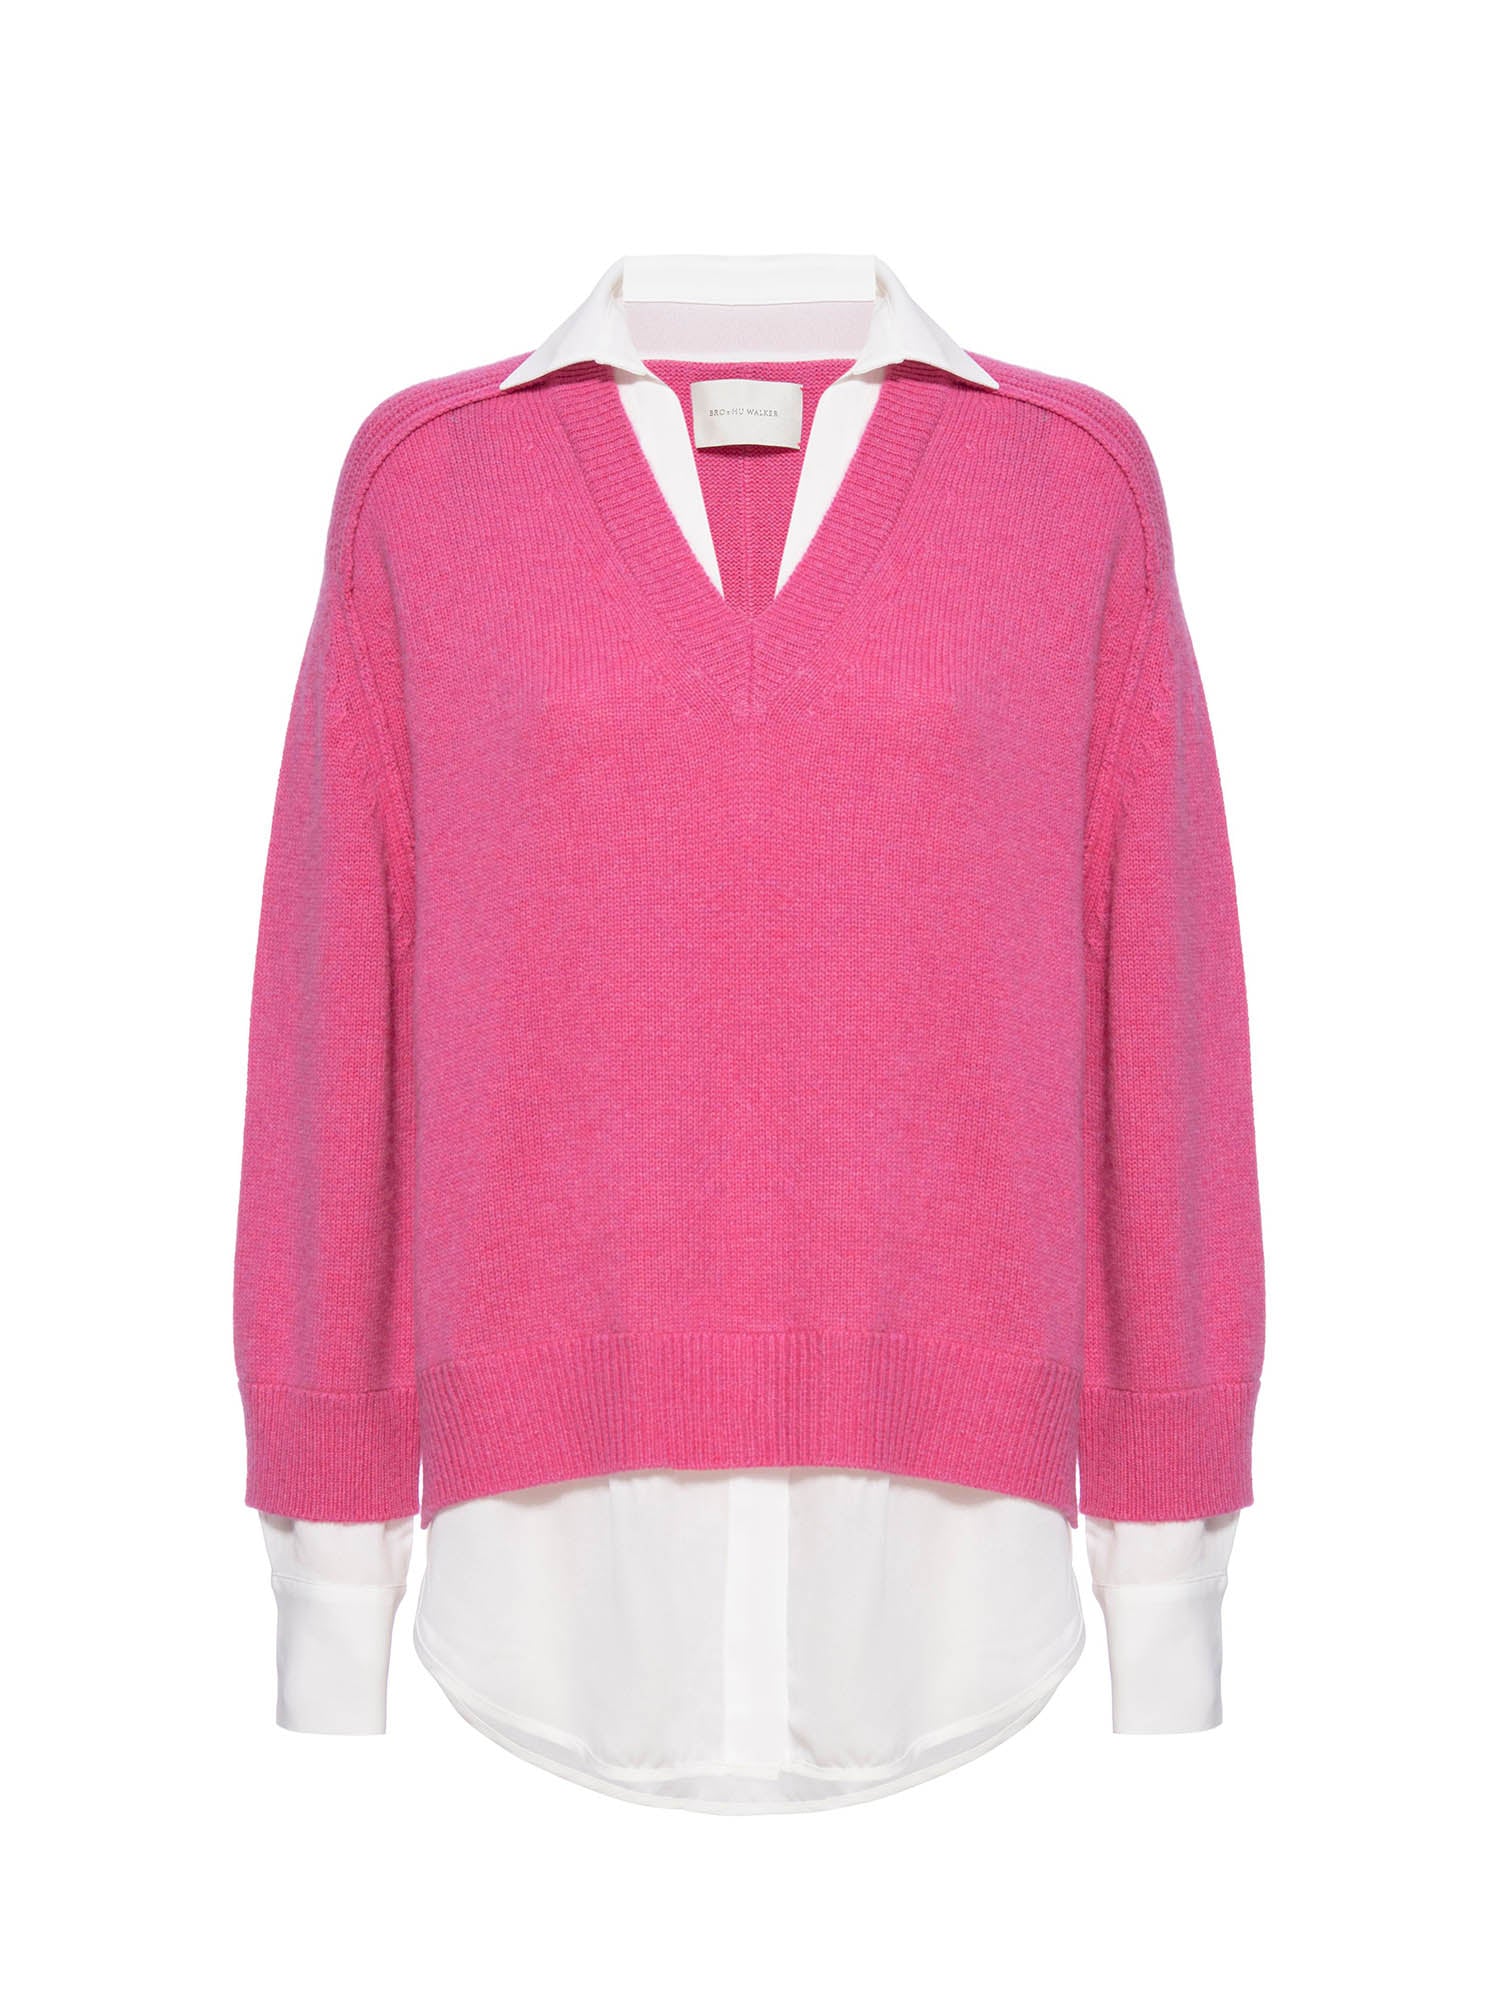 Looker hot pink layered v-neck sweater flat view